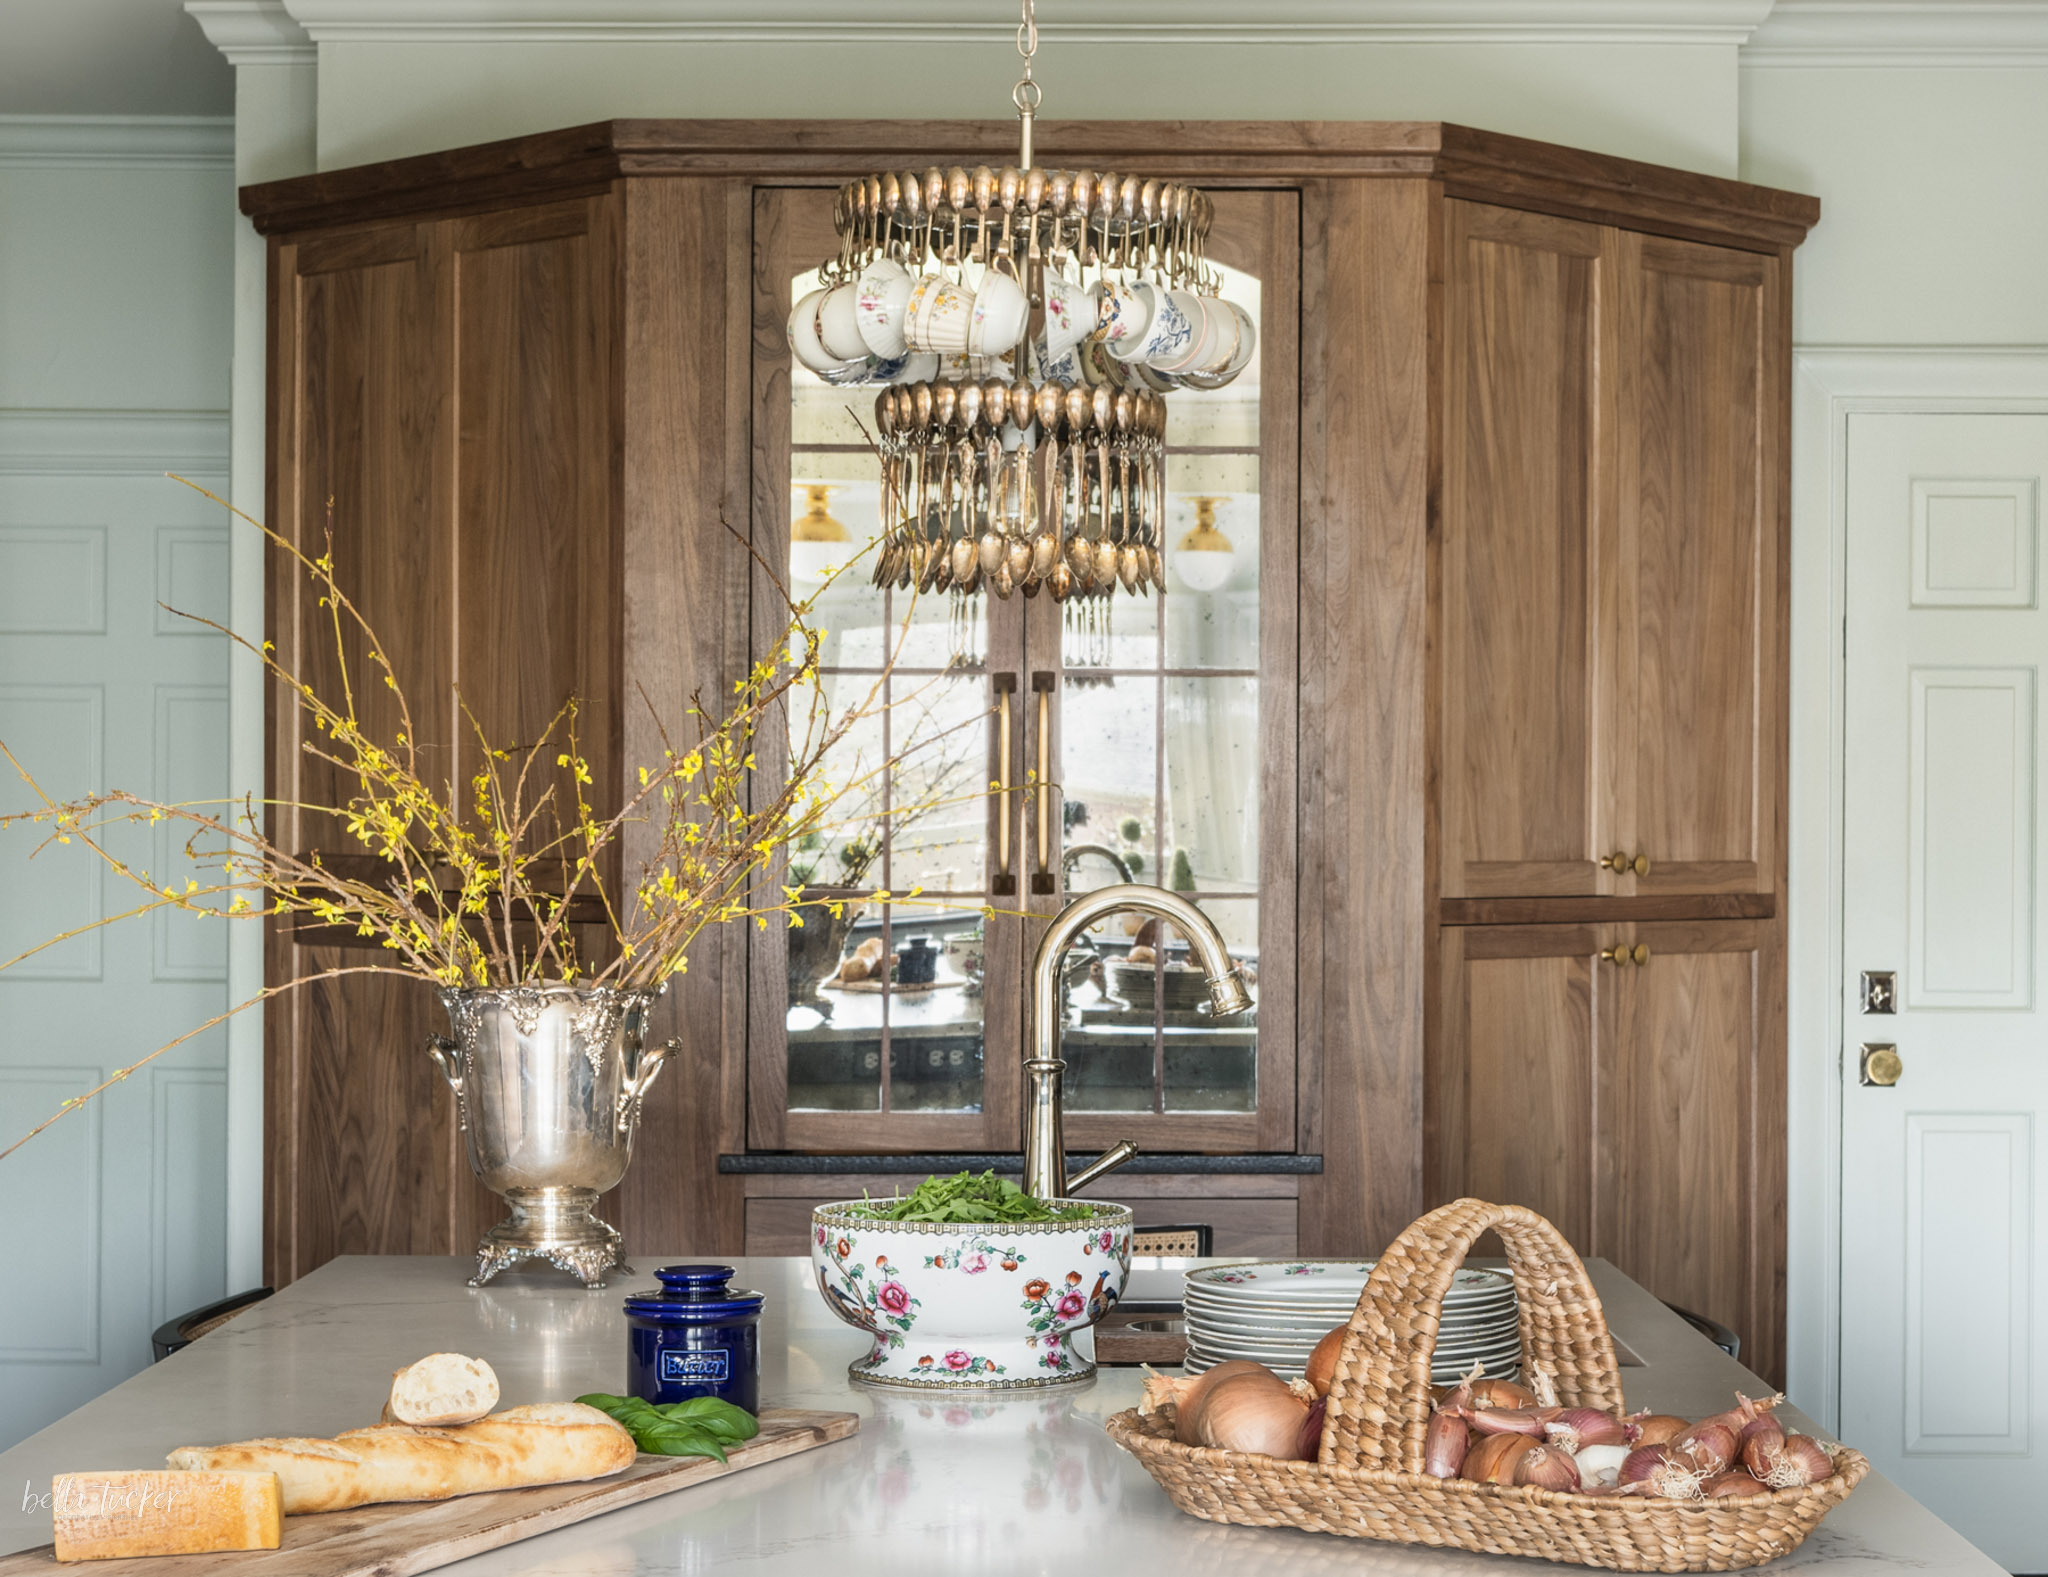 Is This the Most Beautiful Kitchen Ever? - Town & Country Living